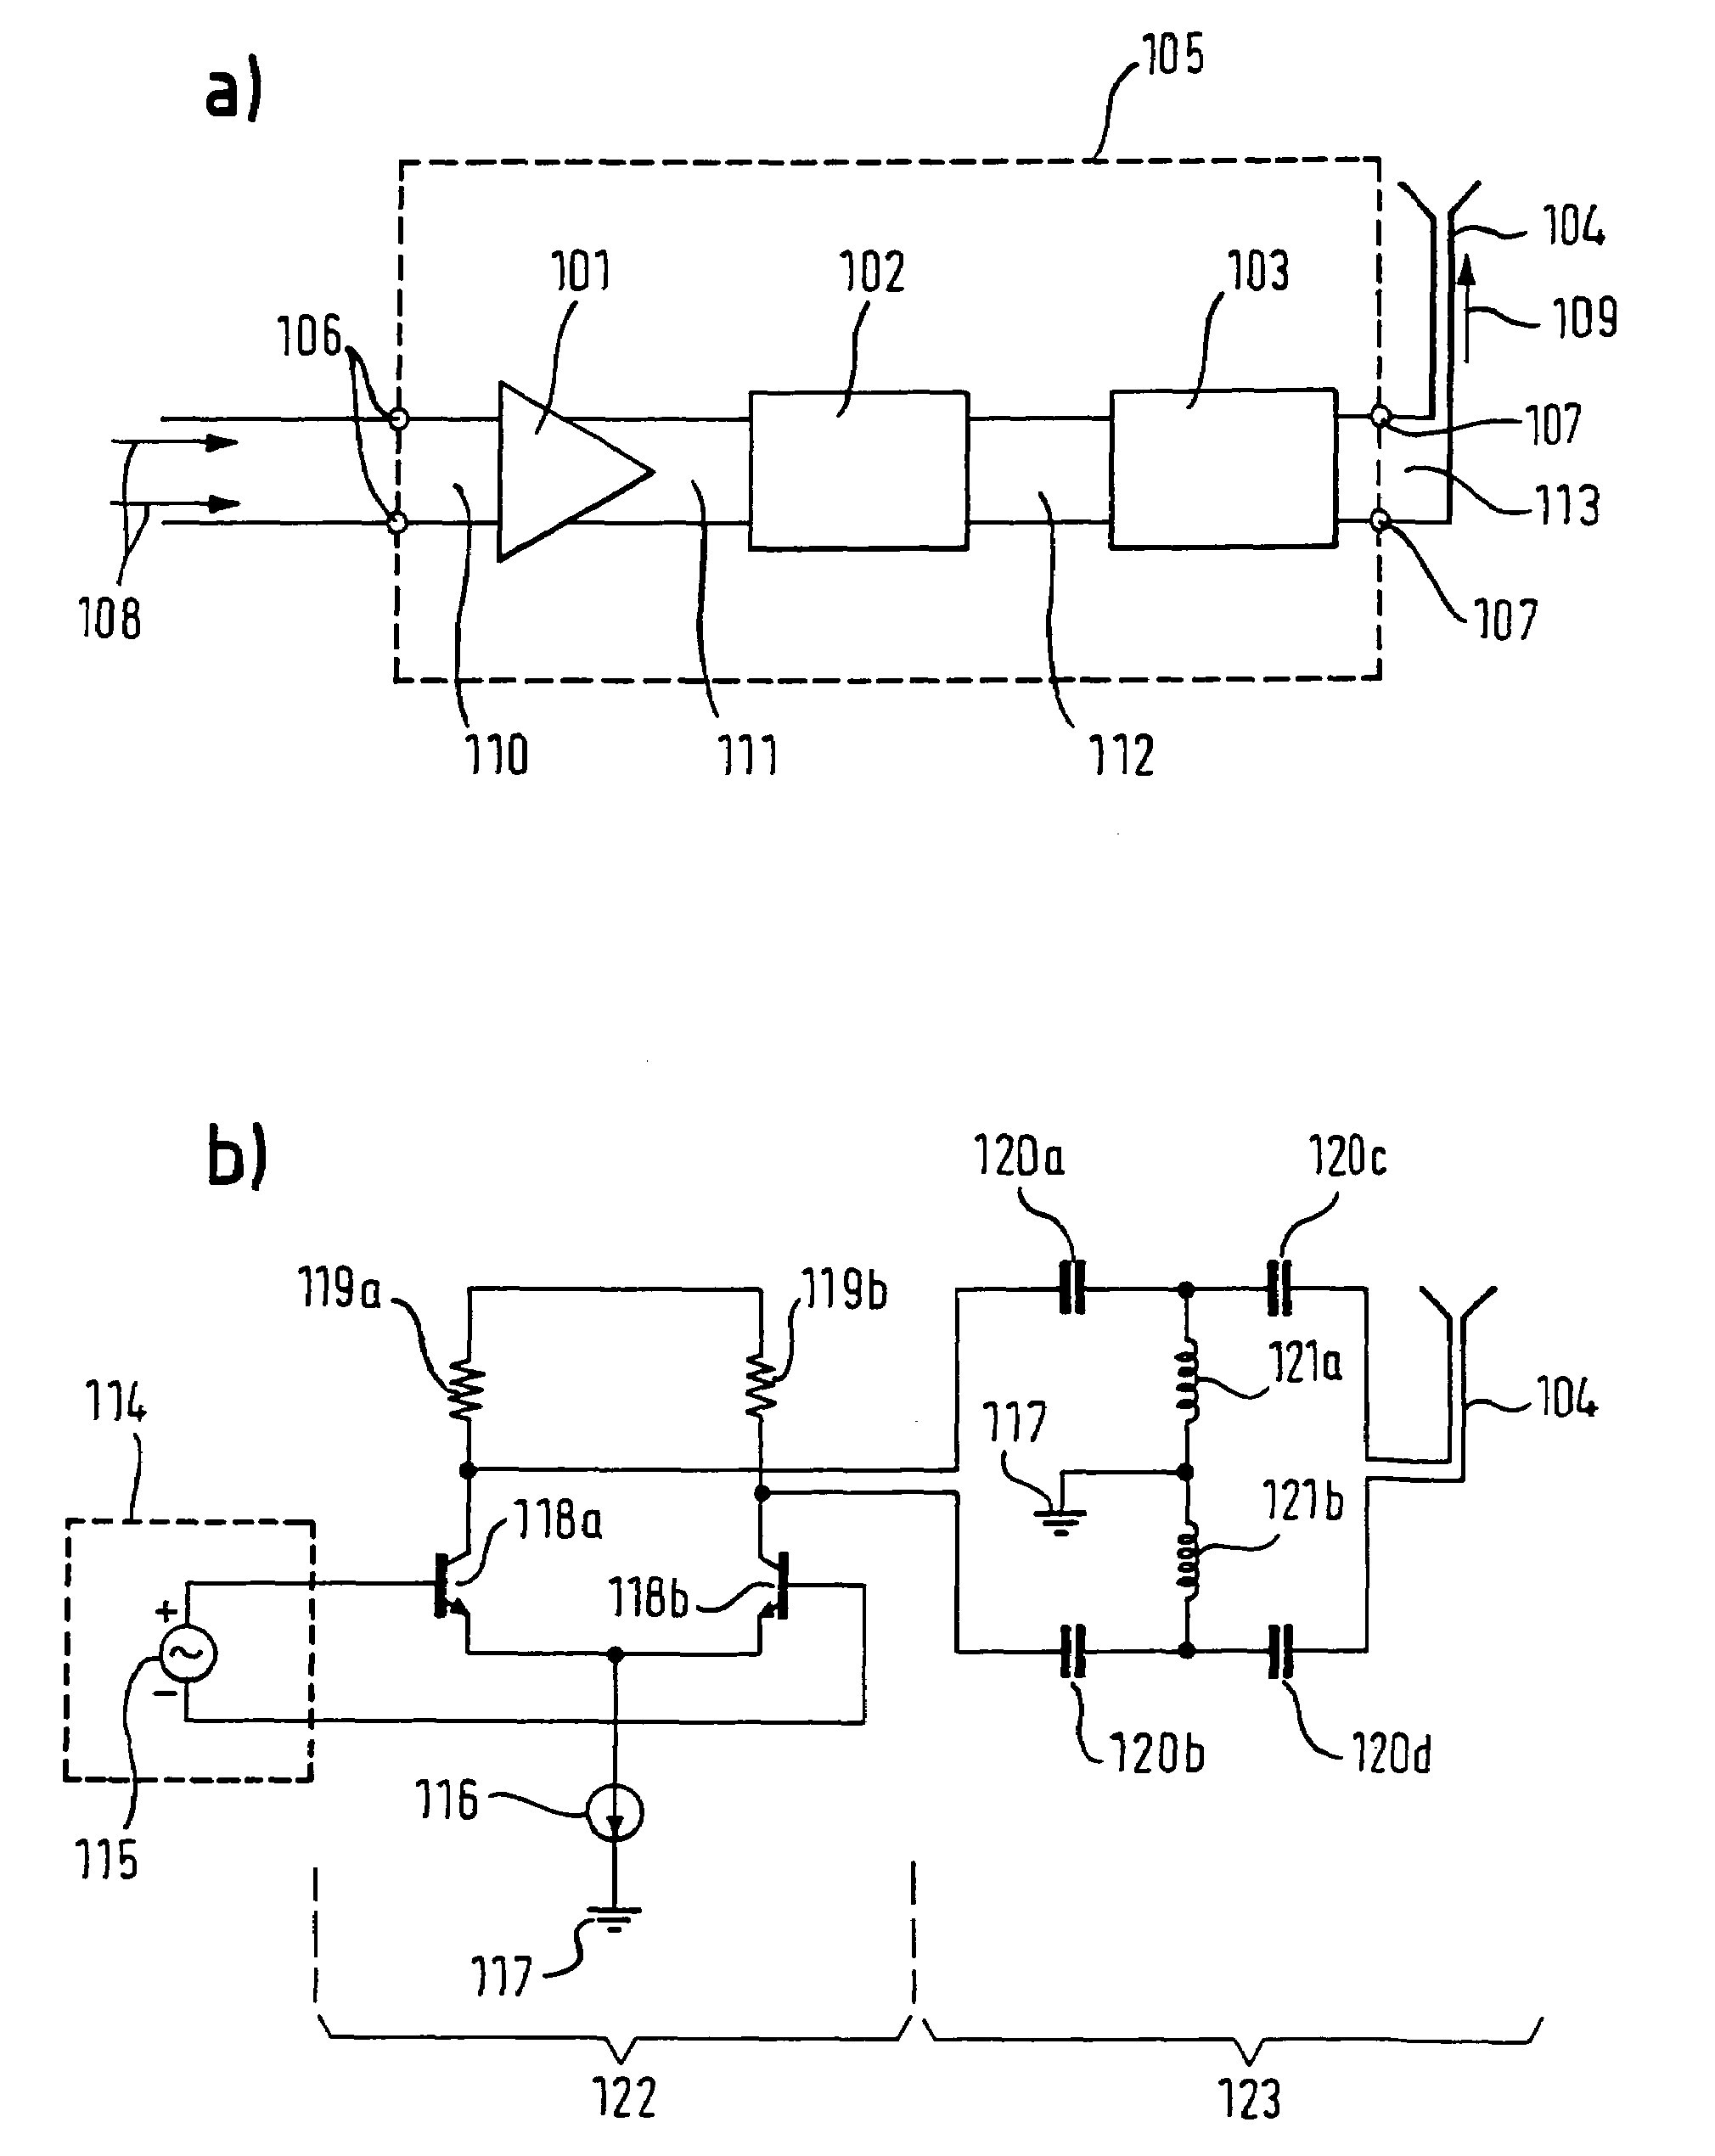 Coupling device for interfacing power amplifier and antenna in differential mode